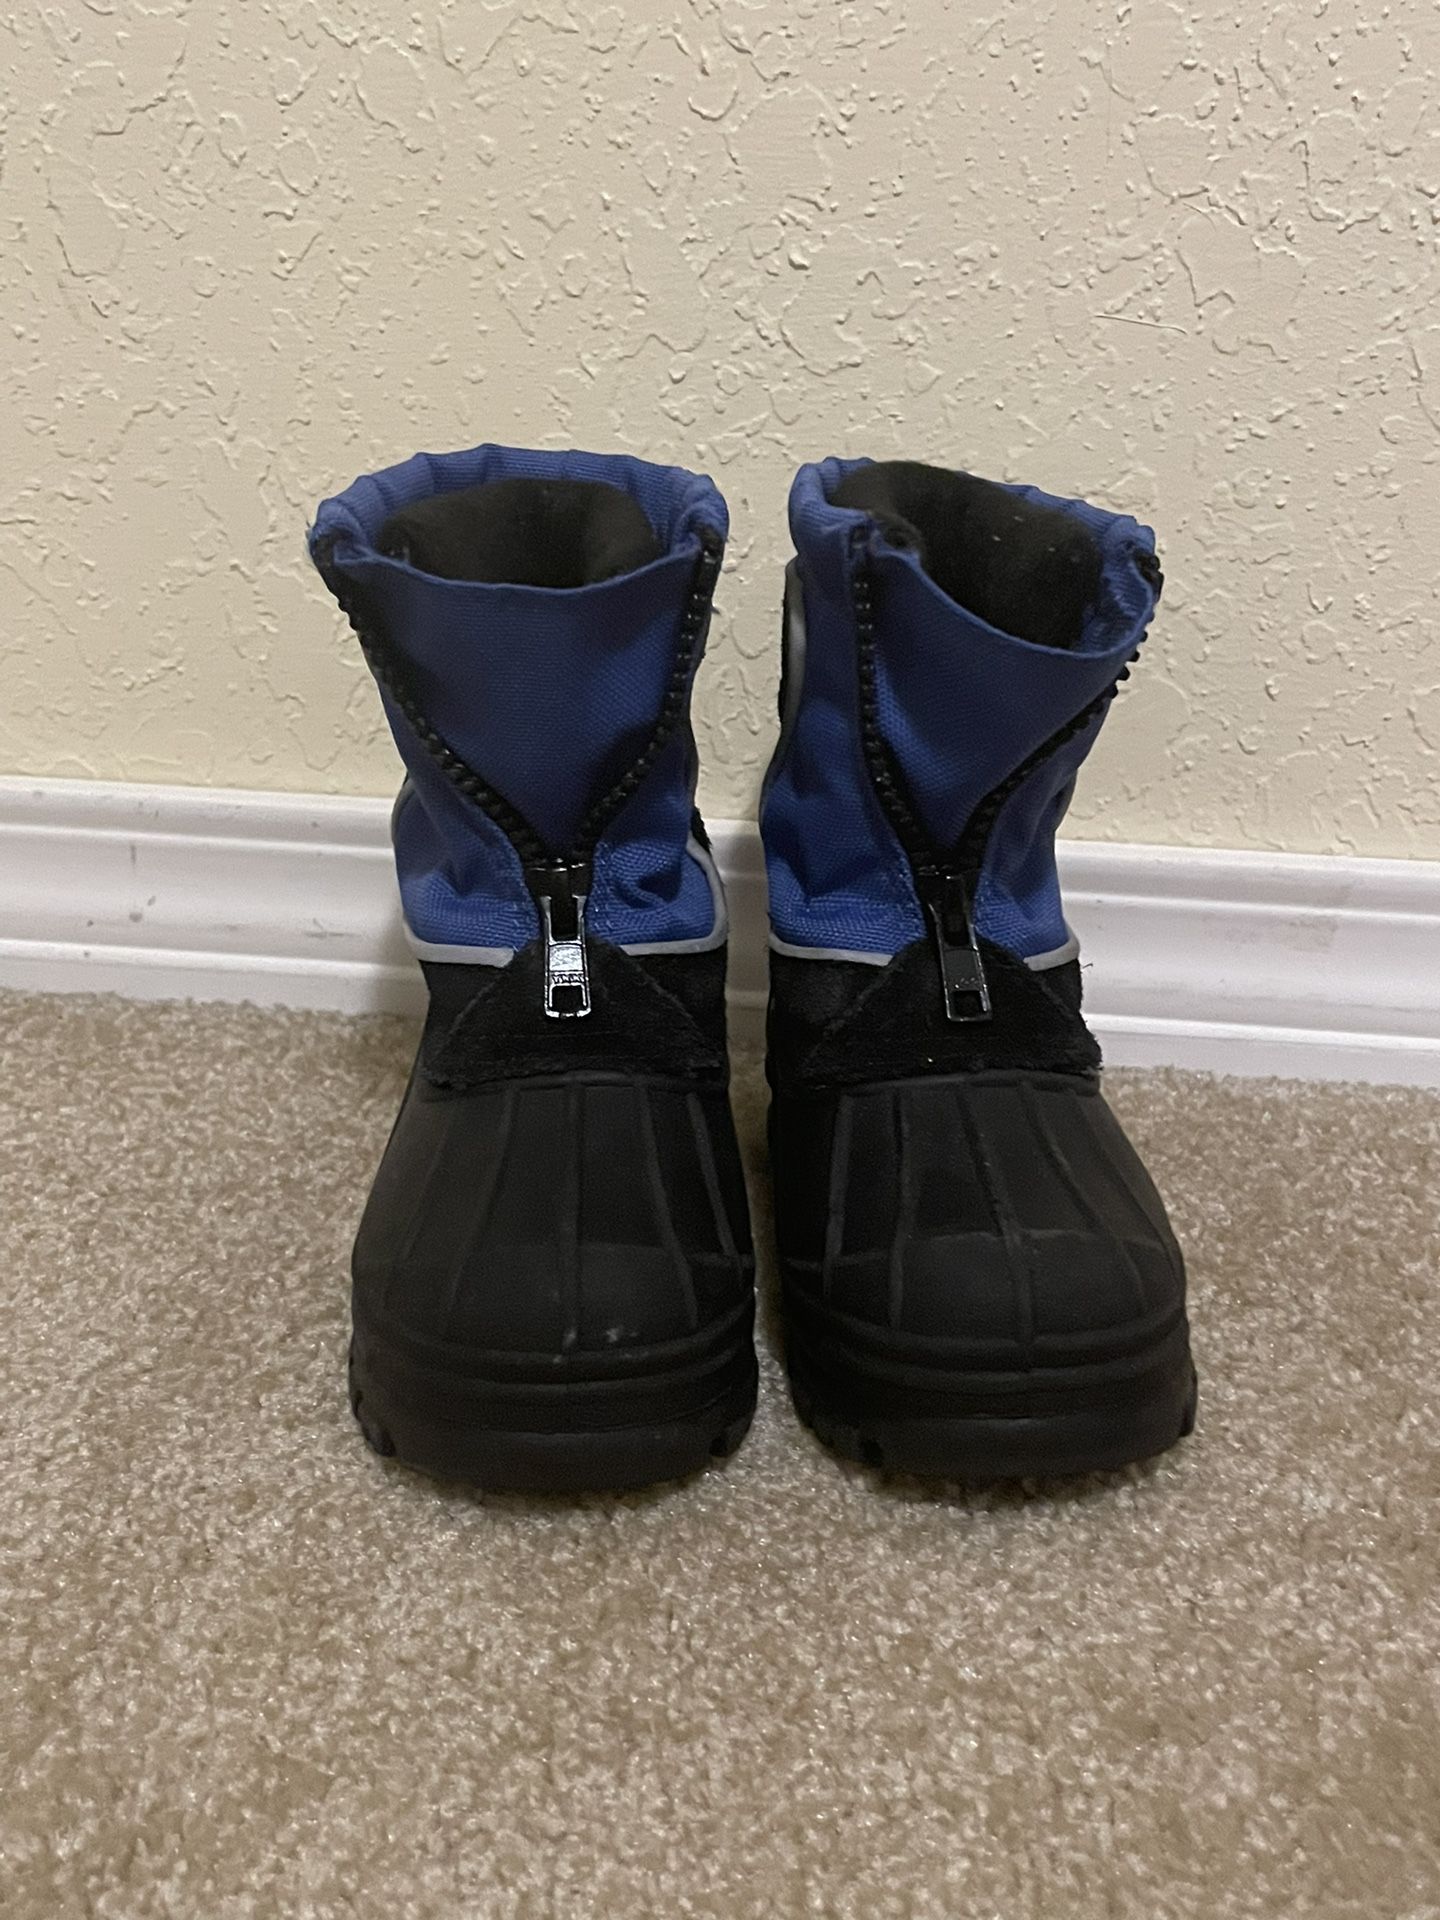 Snow boots Size 6 Toddler